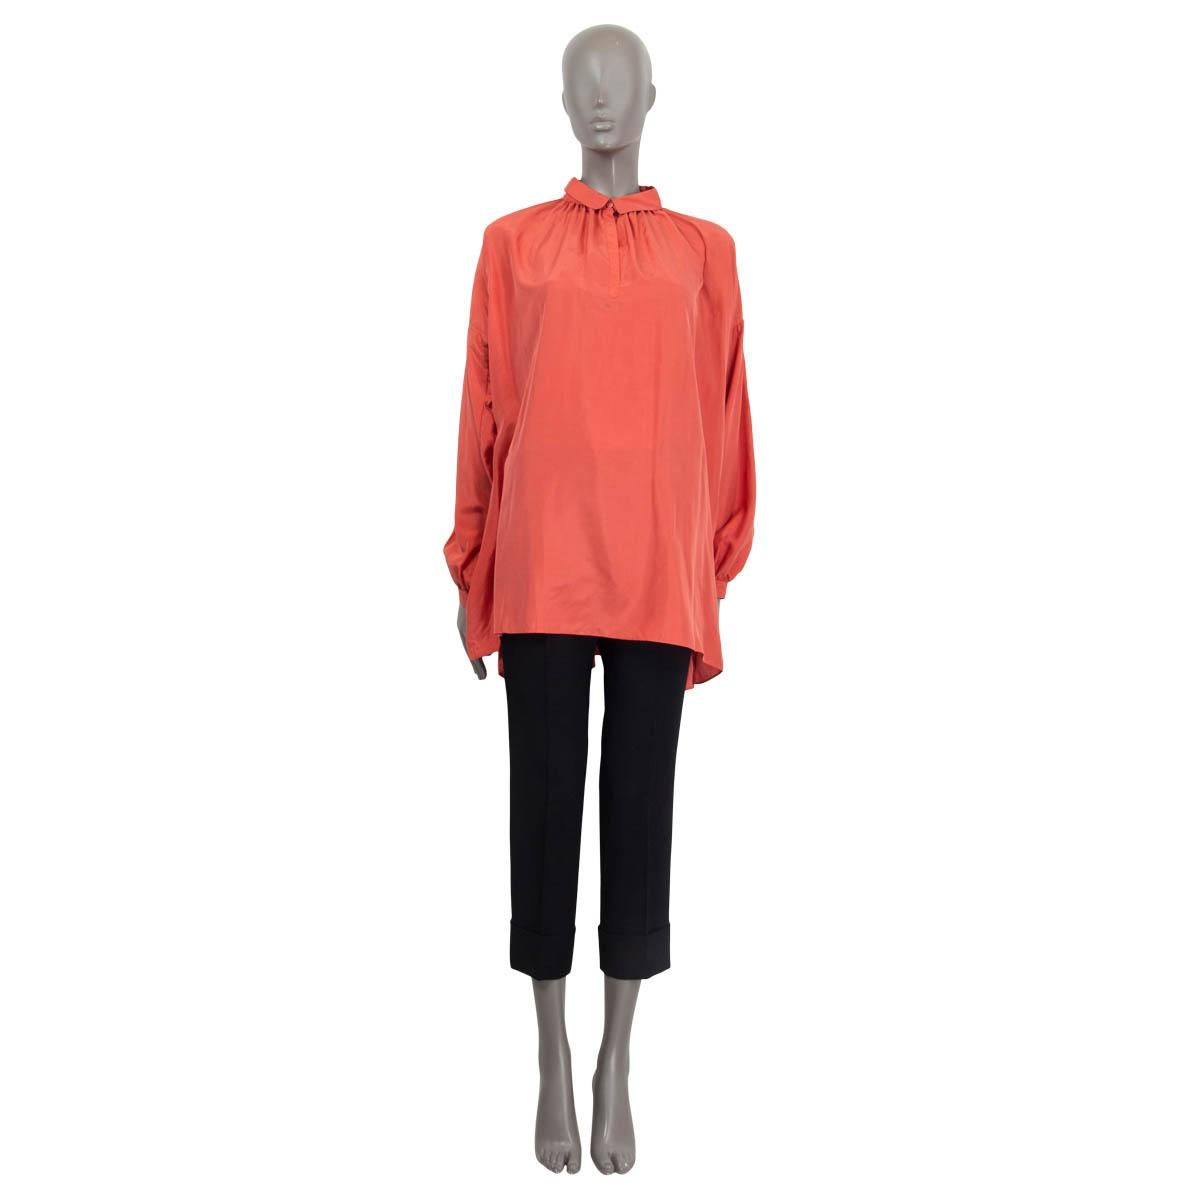 100% authentic Burberry Brit oversized long sleeve blouse in light coral silk (100%). Comes with buttoned cuffs, a notch collar and a v-neck on the front. Unlined. Has been worn and is in excellent condition. Comes with an additional